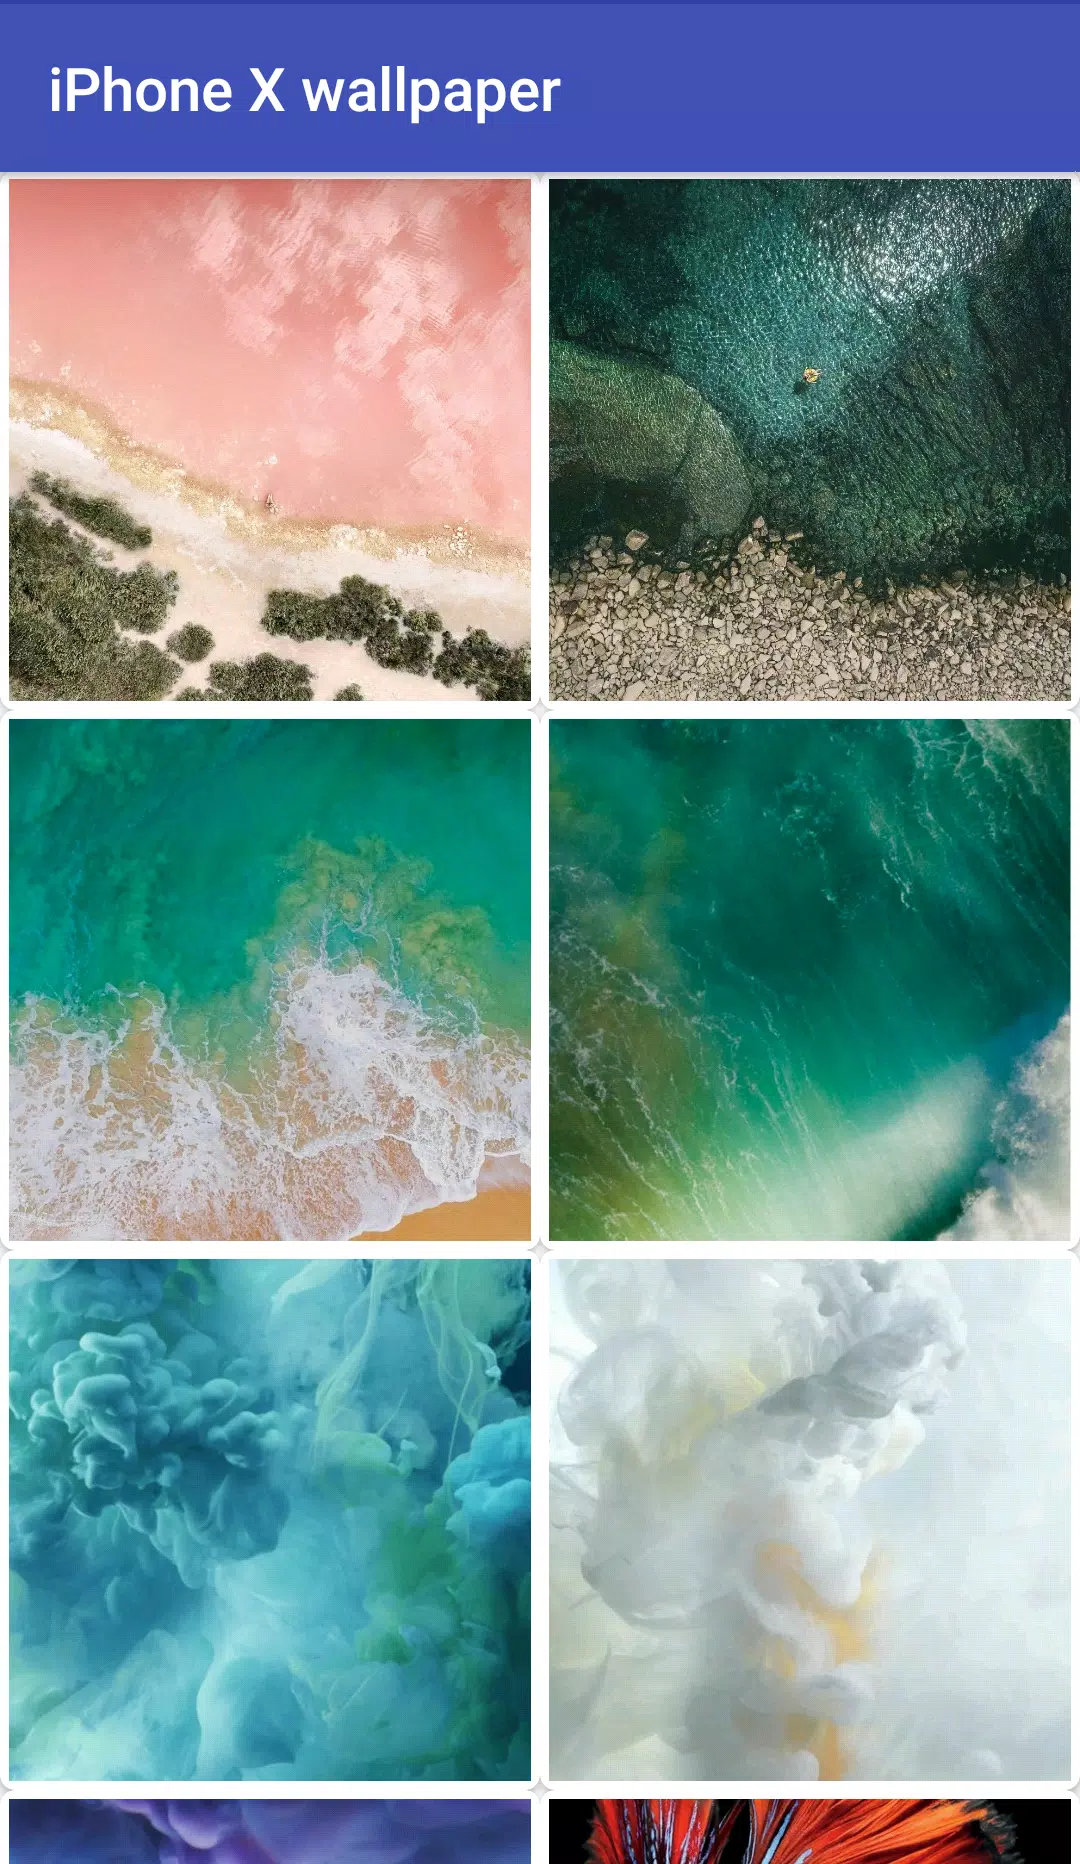 Wallpaper Iphone X & Iphone 8 Best Ios Full Hd Cho Android - Tải Về Apk